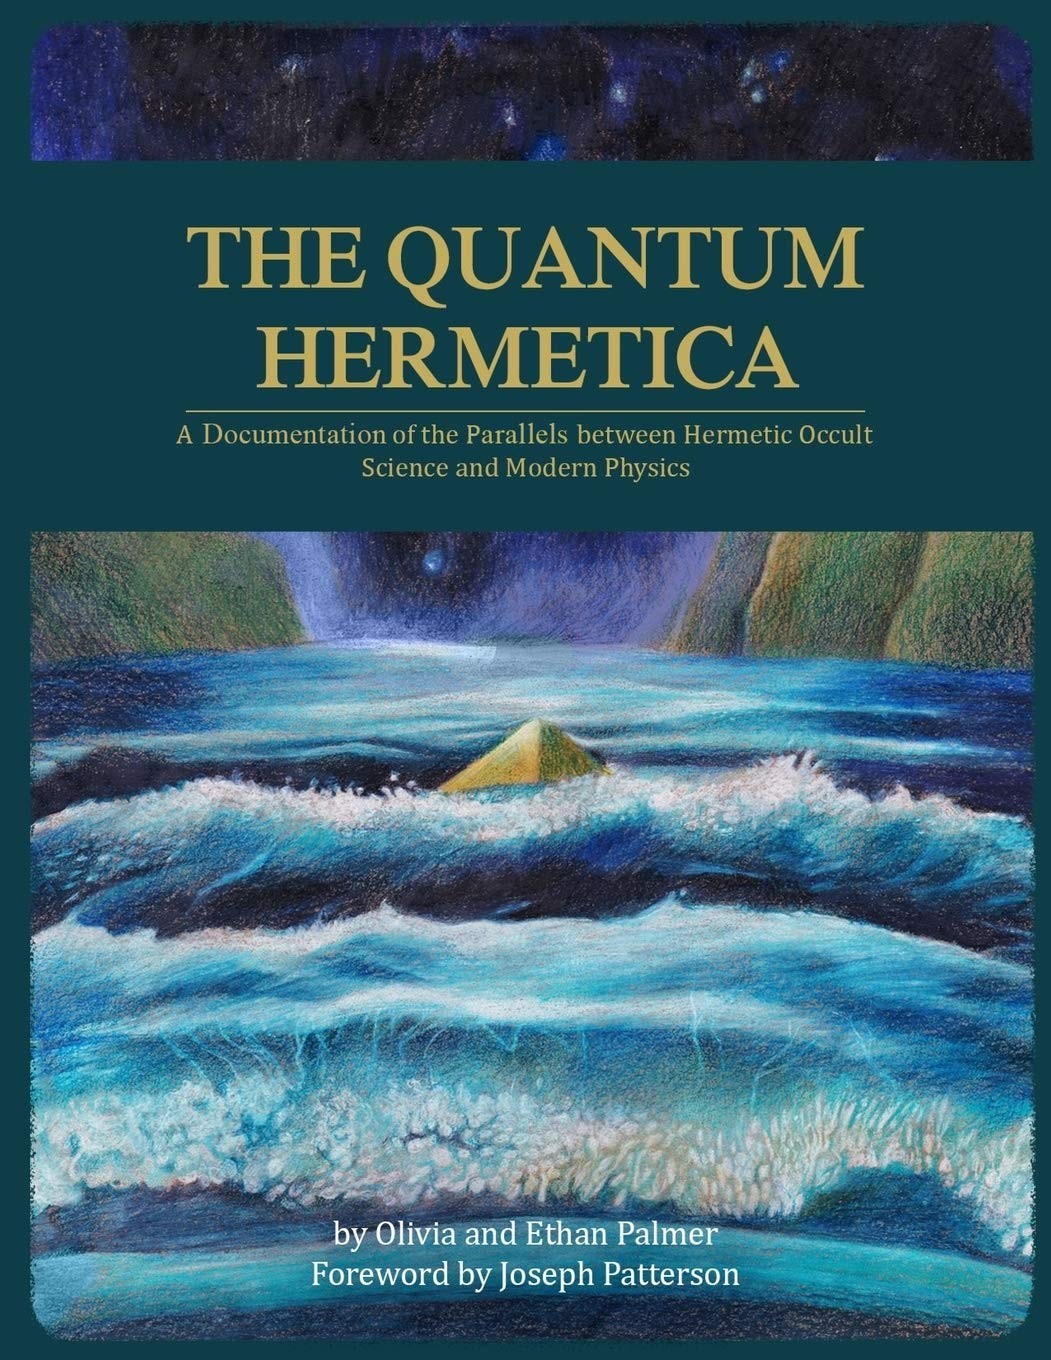 The Quantum Hermetica: A Documenting of the Parallels Between Hermetic Occult Science and Modern Physics